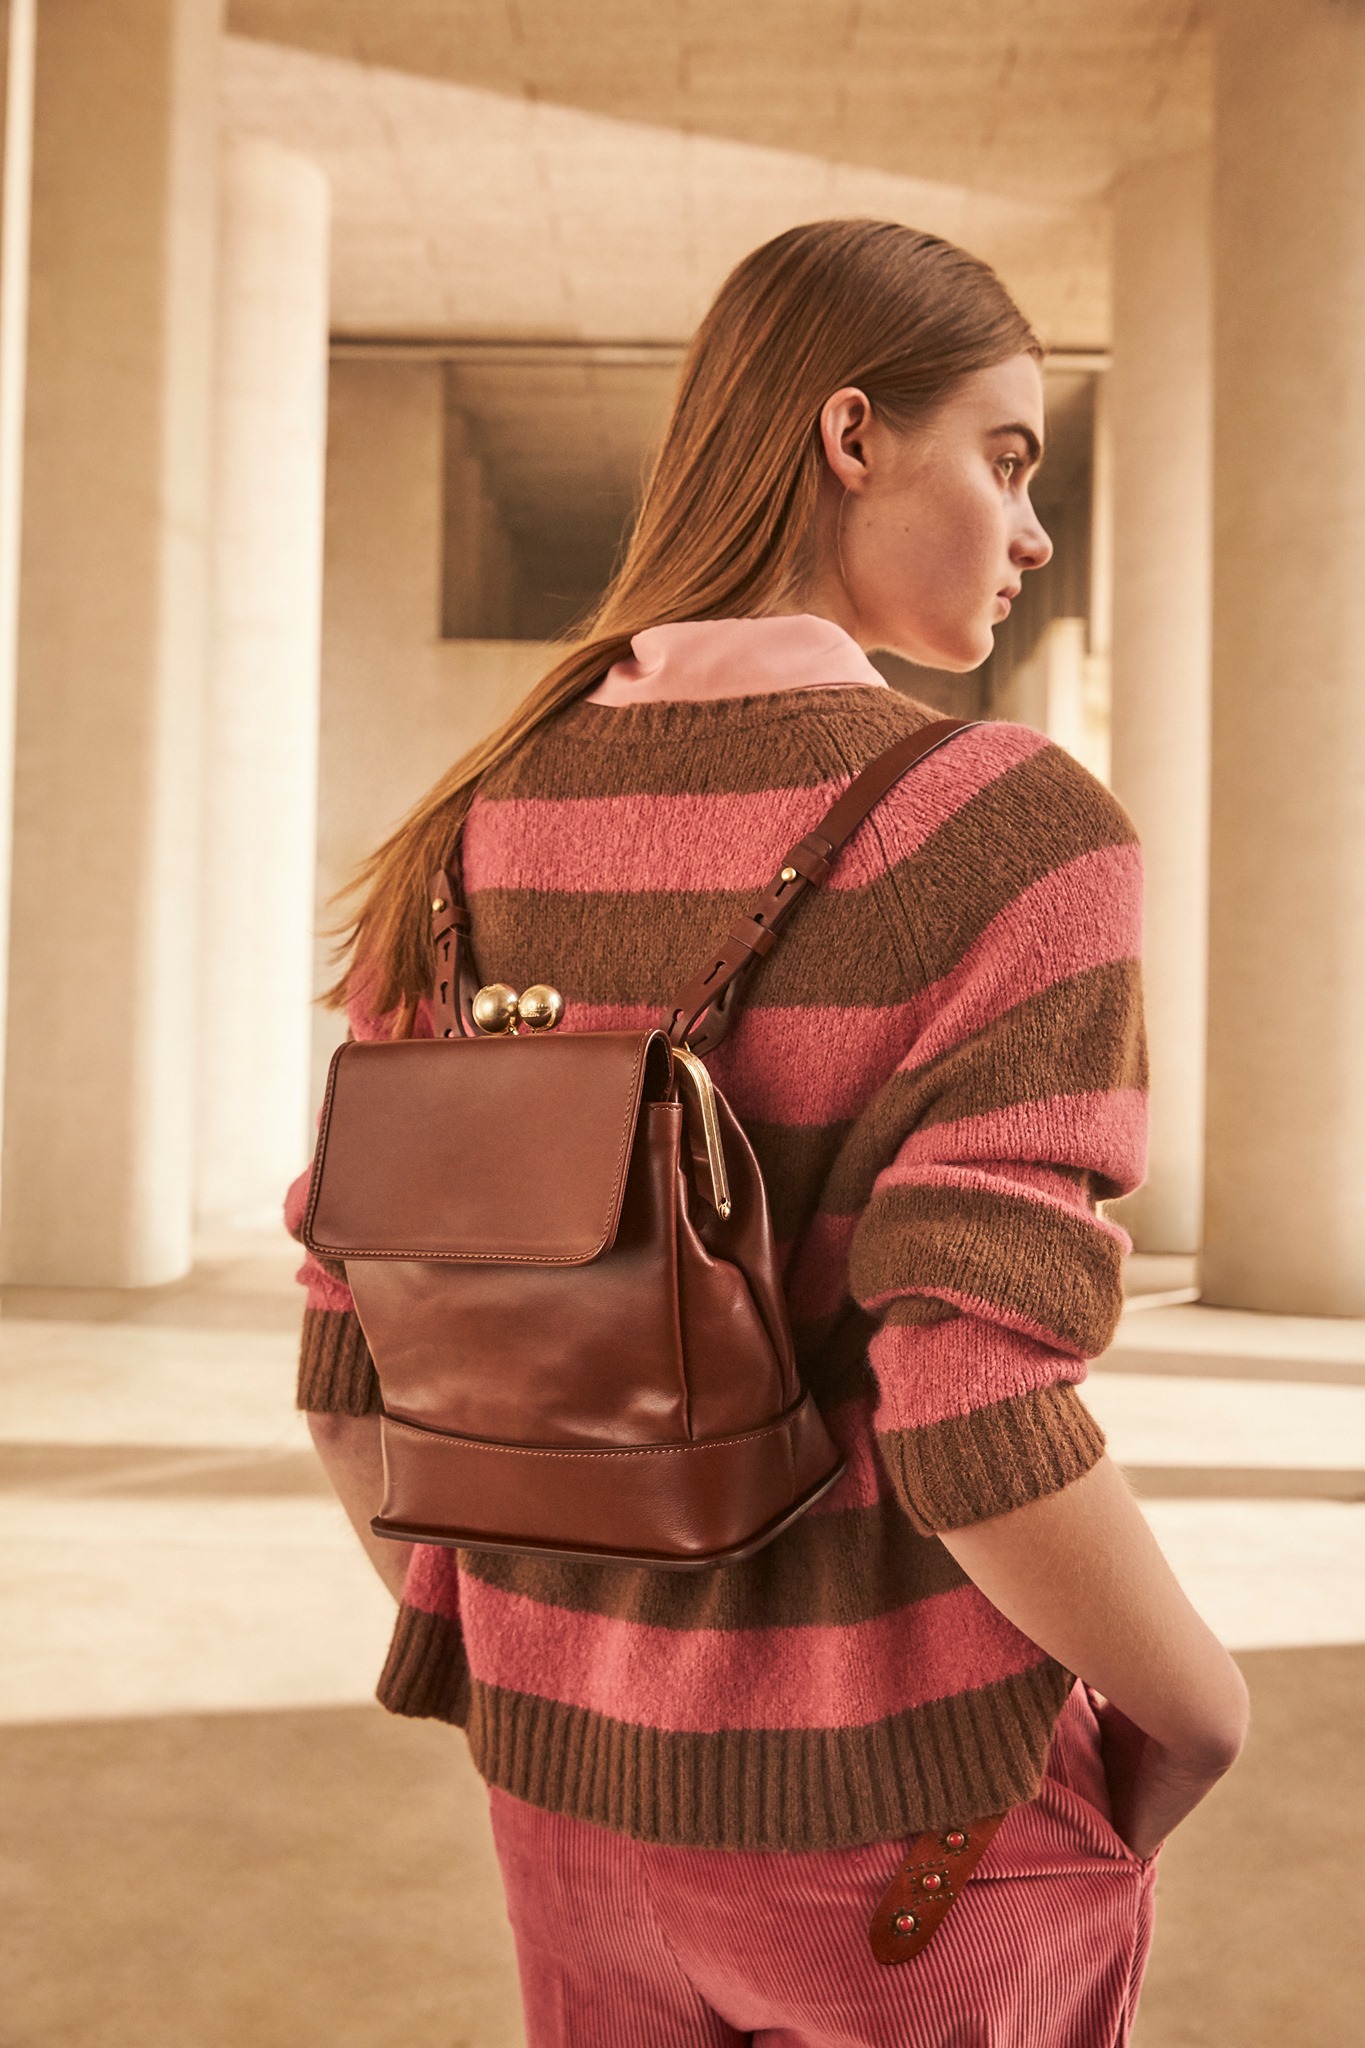 The Pasticcino backpack: practically perfect.